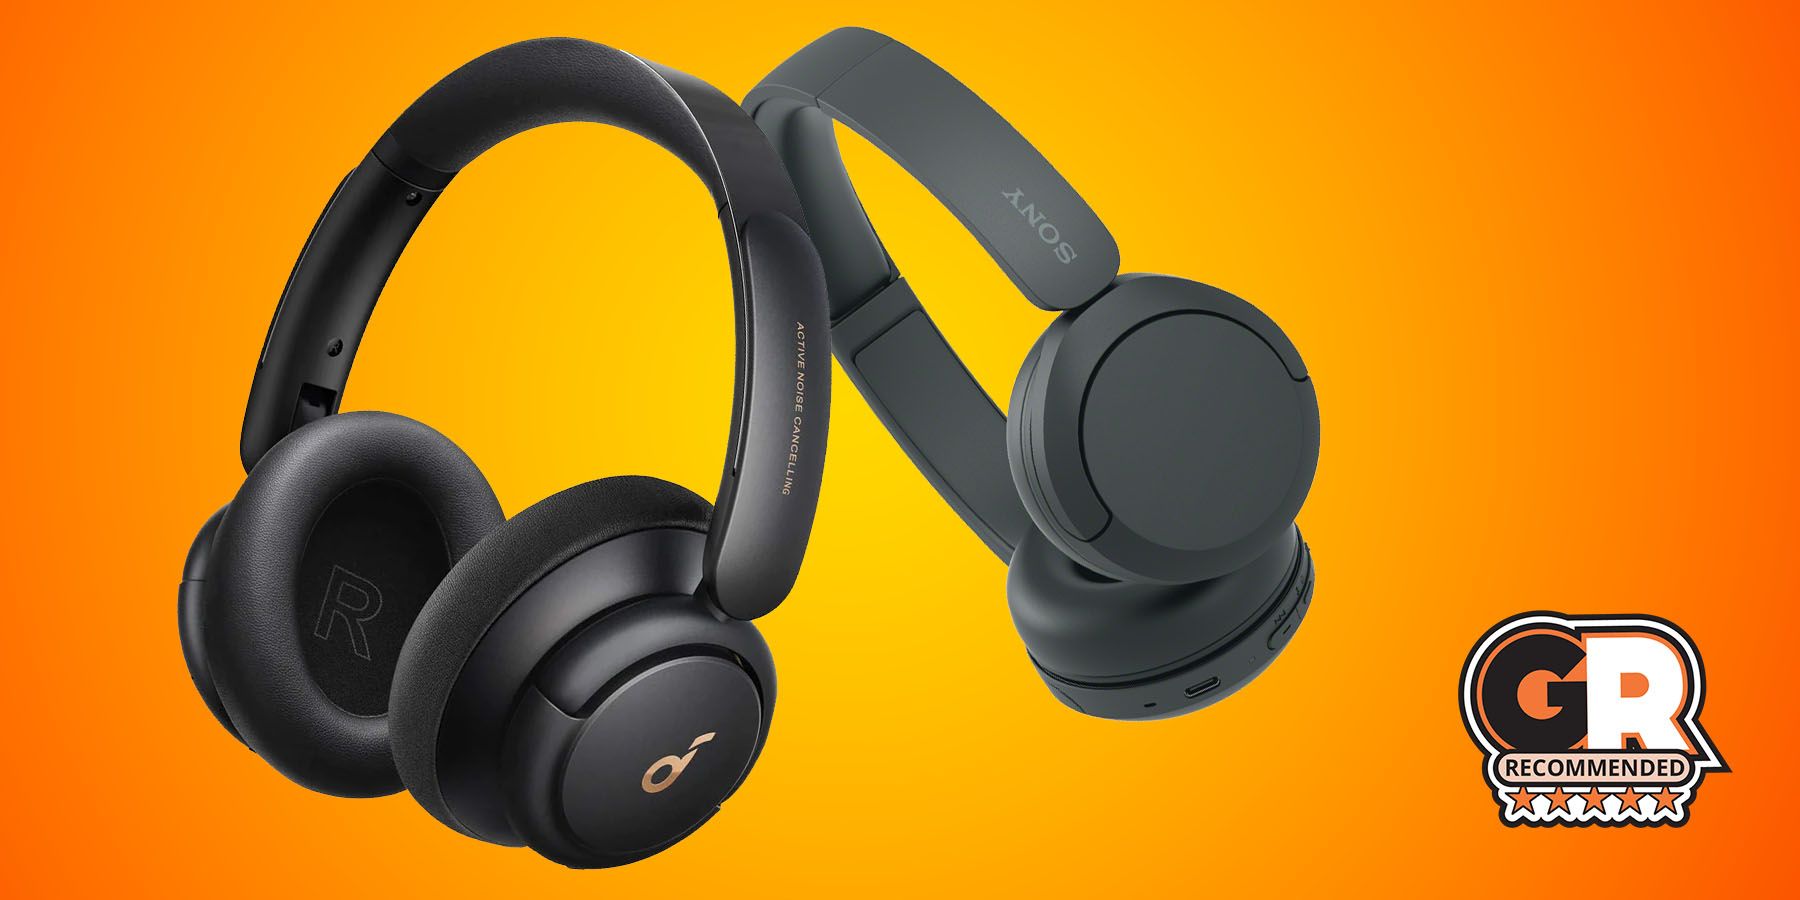 Super Affordable': $100 Sony WH-CH520 Wireless Headphones are More